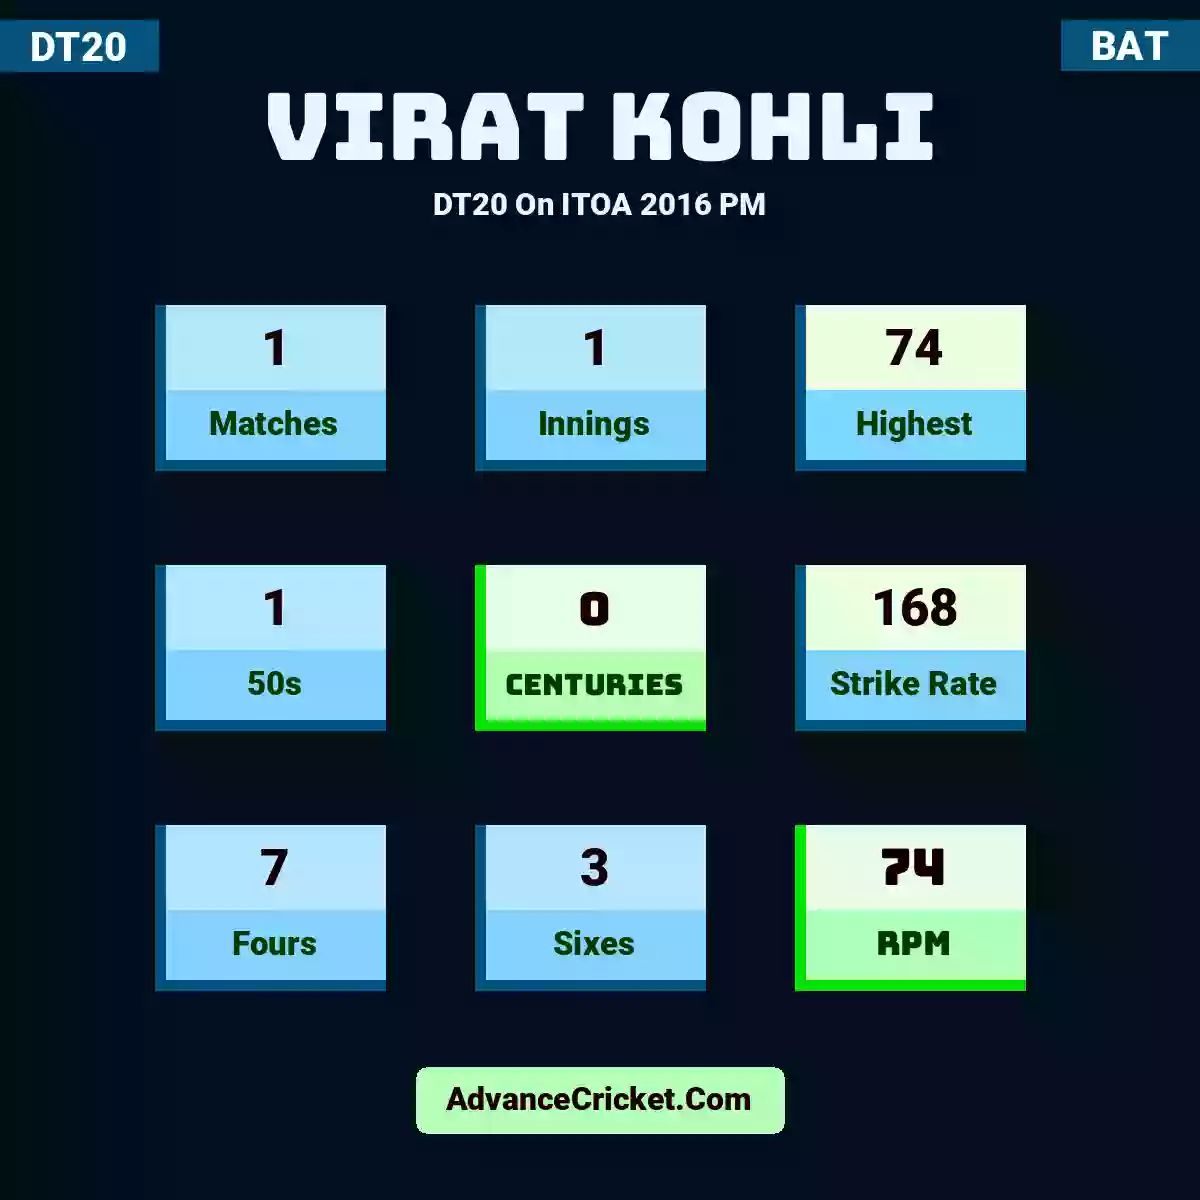 Virat Kohli DT20  On ITOA 2016 PM, Virat Kohli played 1 matches, scored 74 runs as highest, 1 half-centuries, and 0 centuries, with a strike rate of 168. V.Kohli hit 7 fours and 3 sixes, with an RPM of 74.